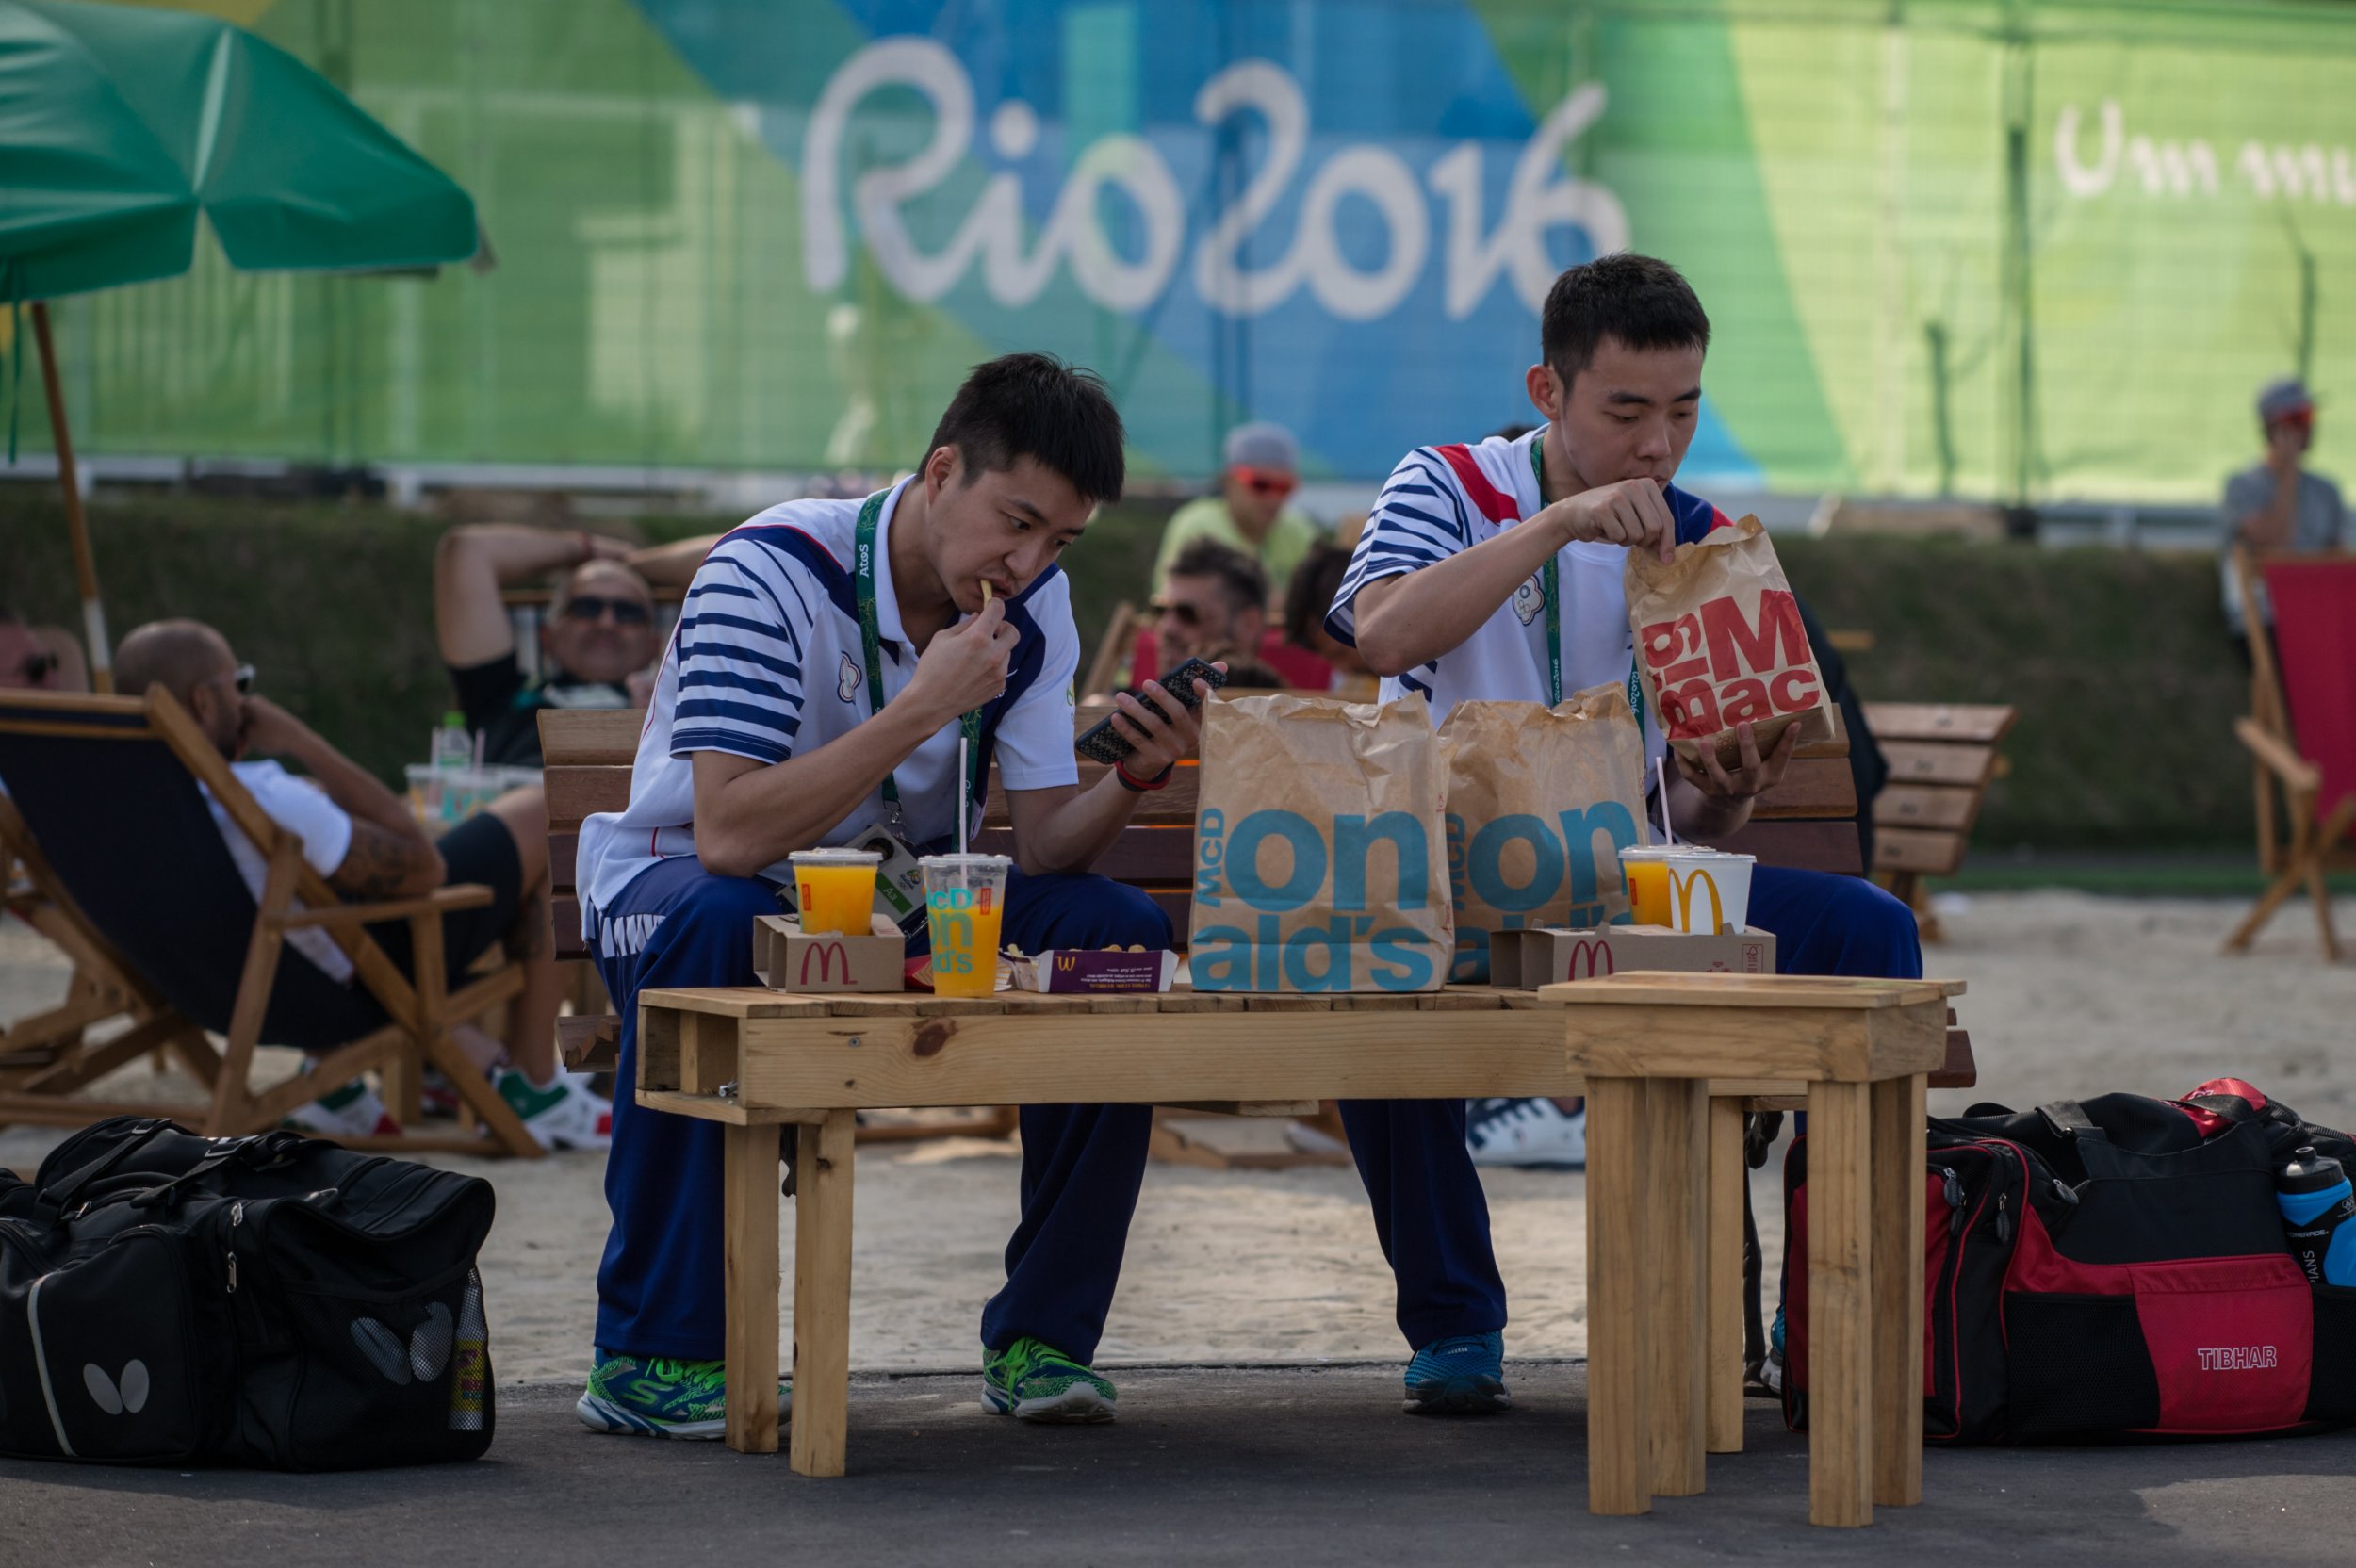 Athletes eating fast food at the Olympics